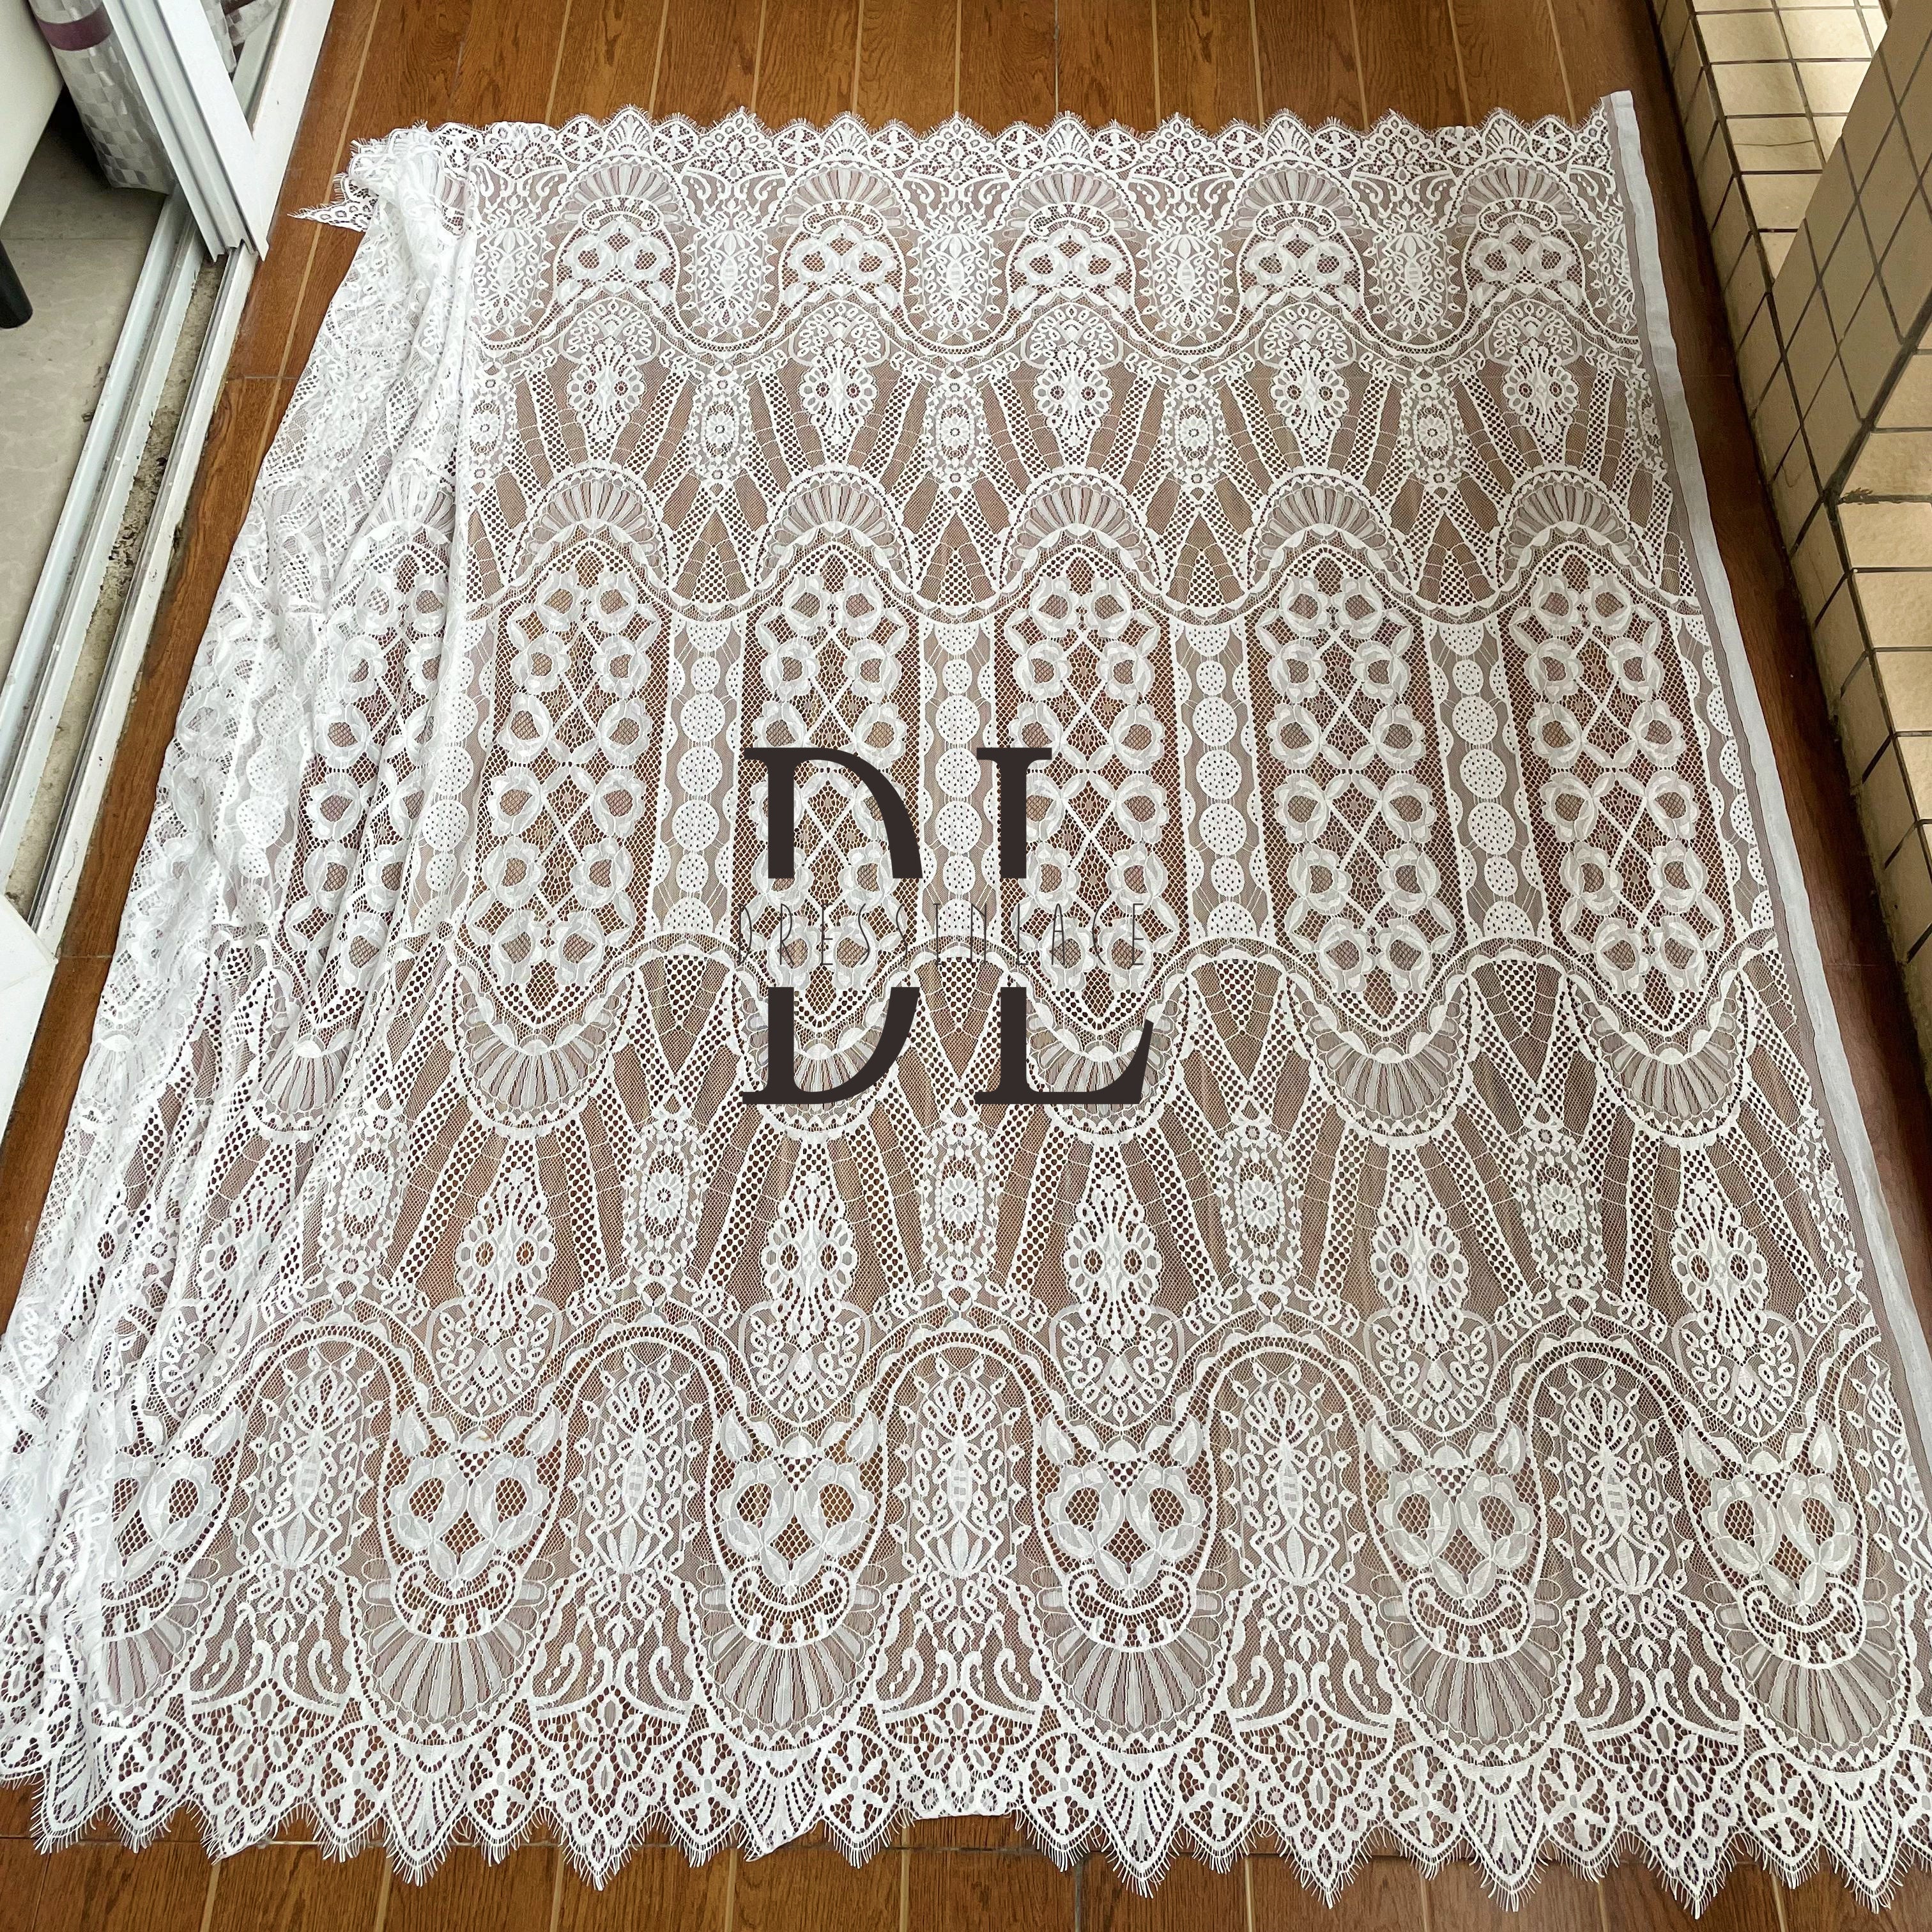 DL15100 Delicate Floral Lace Fabric for Wedding Dress - Soft and Exquisite Eyelash Material 3yards per pieces